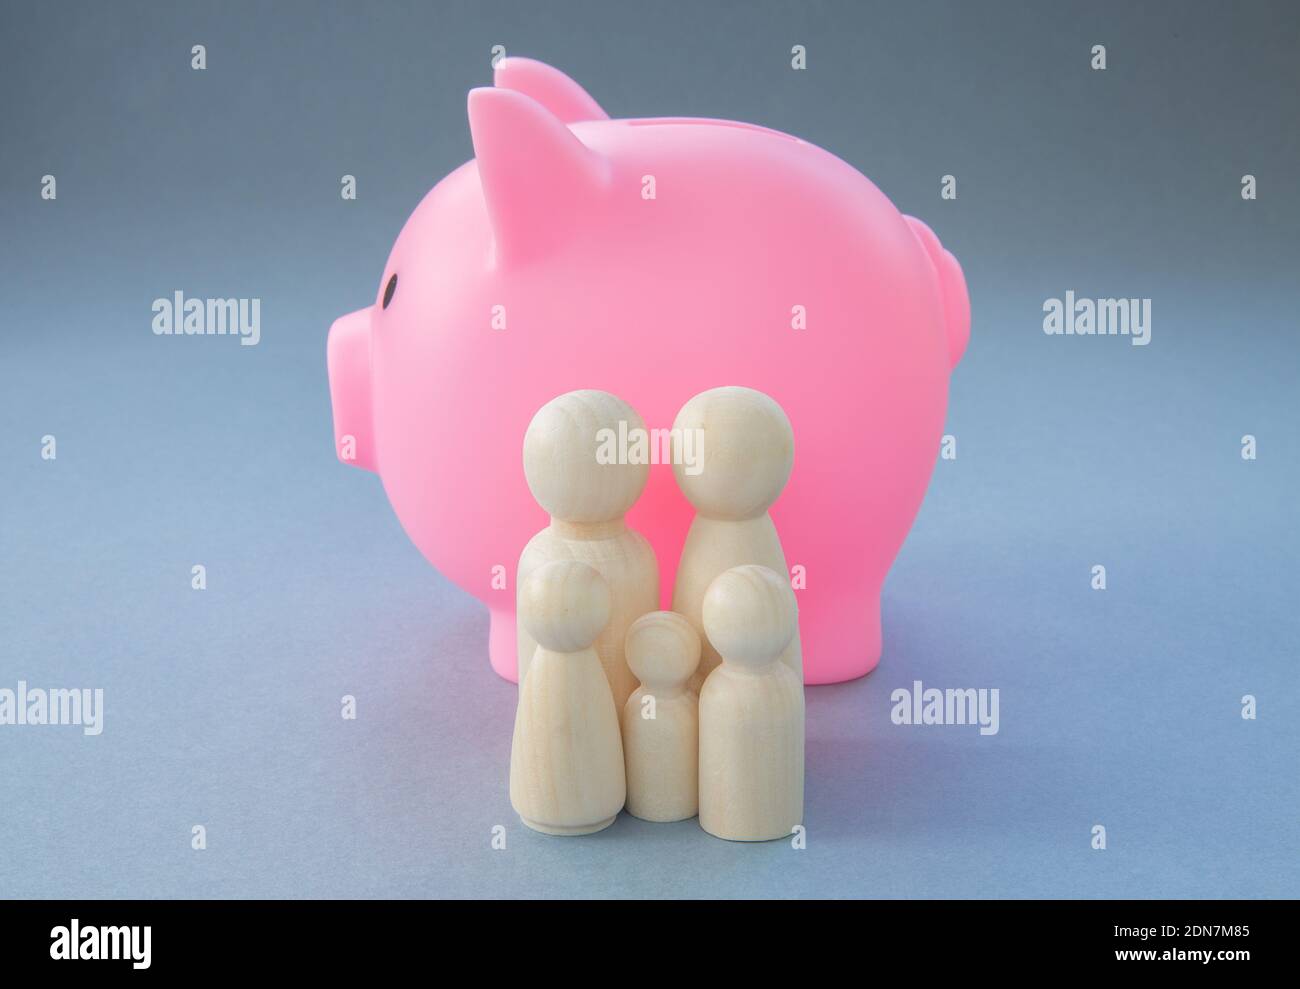 A Concept Image Of Family Home Finances With Pink Piggy Bank The Bank Of Mum And Dad With Copy Stock Photo